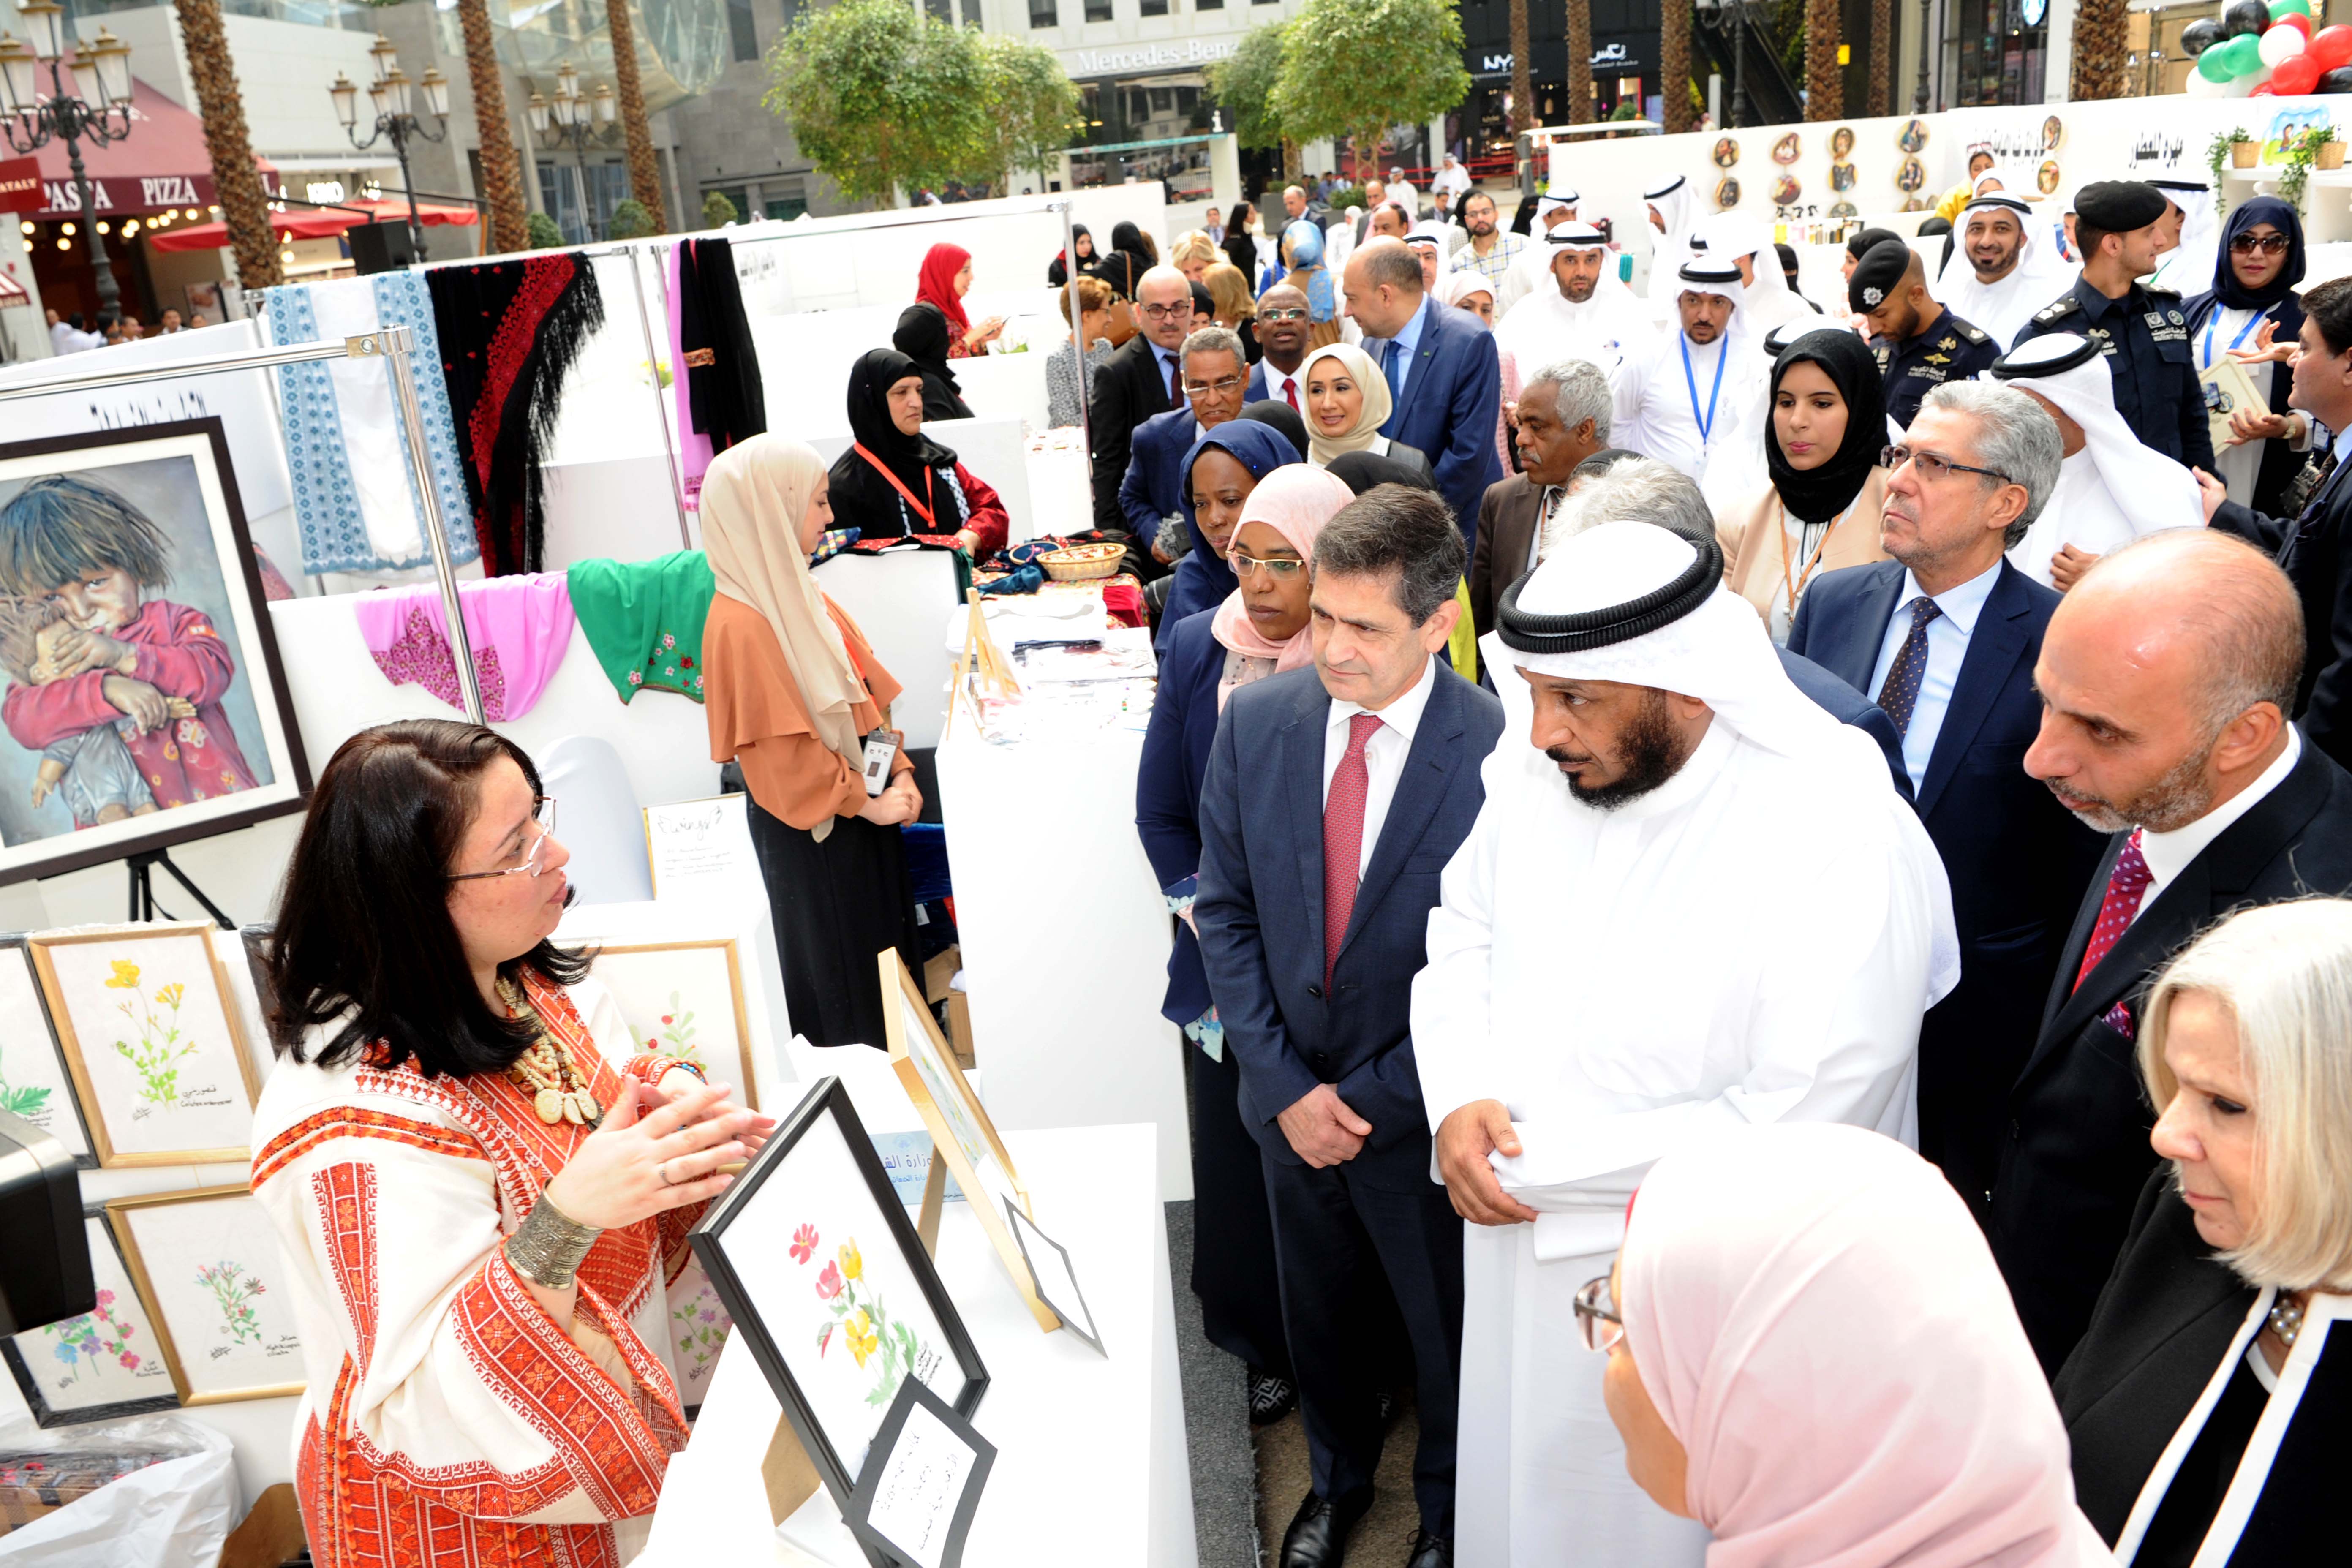 Minister of Social Affairs during the inauguration ceremony of the fair